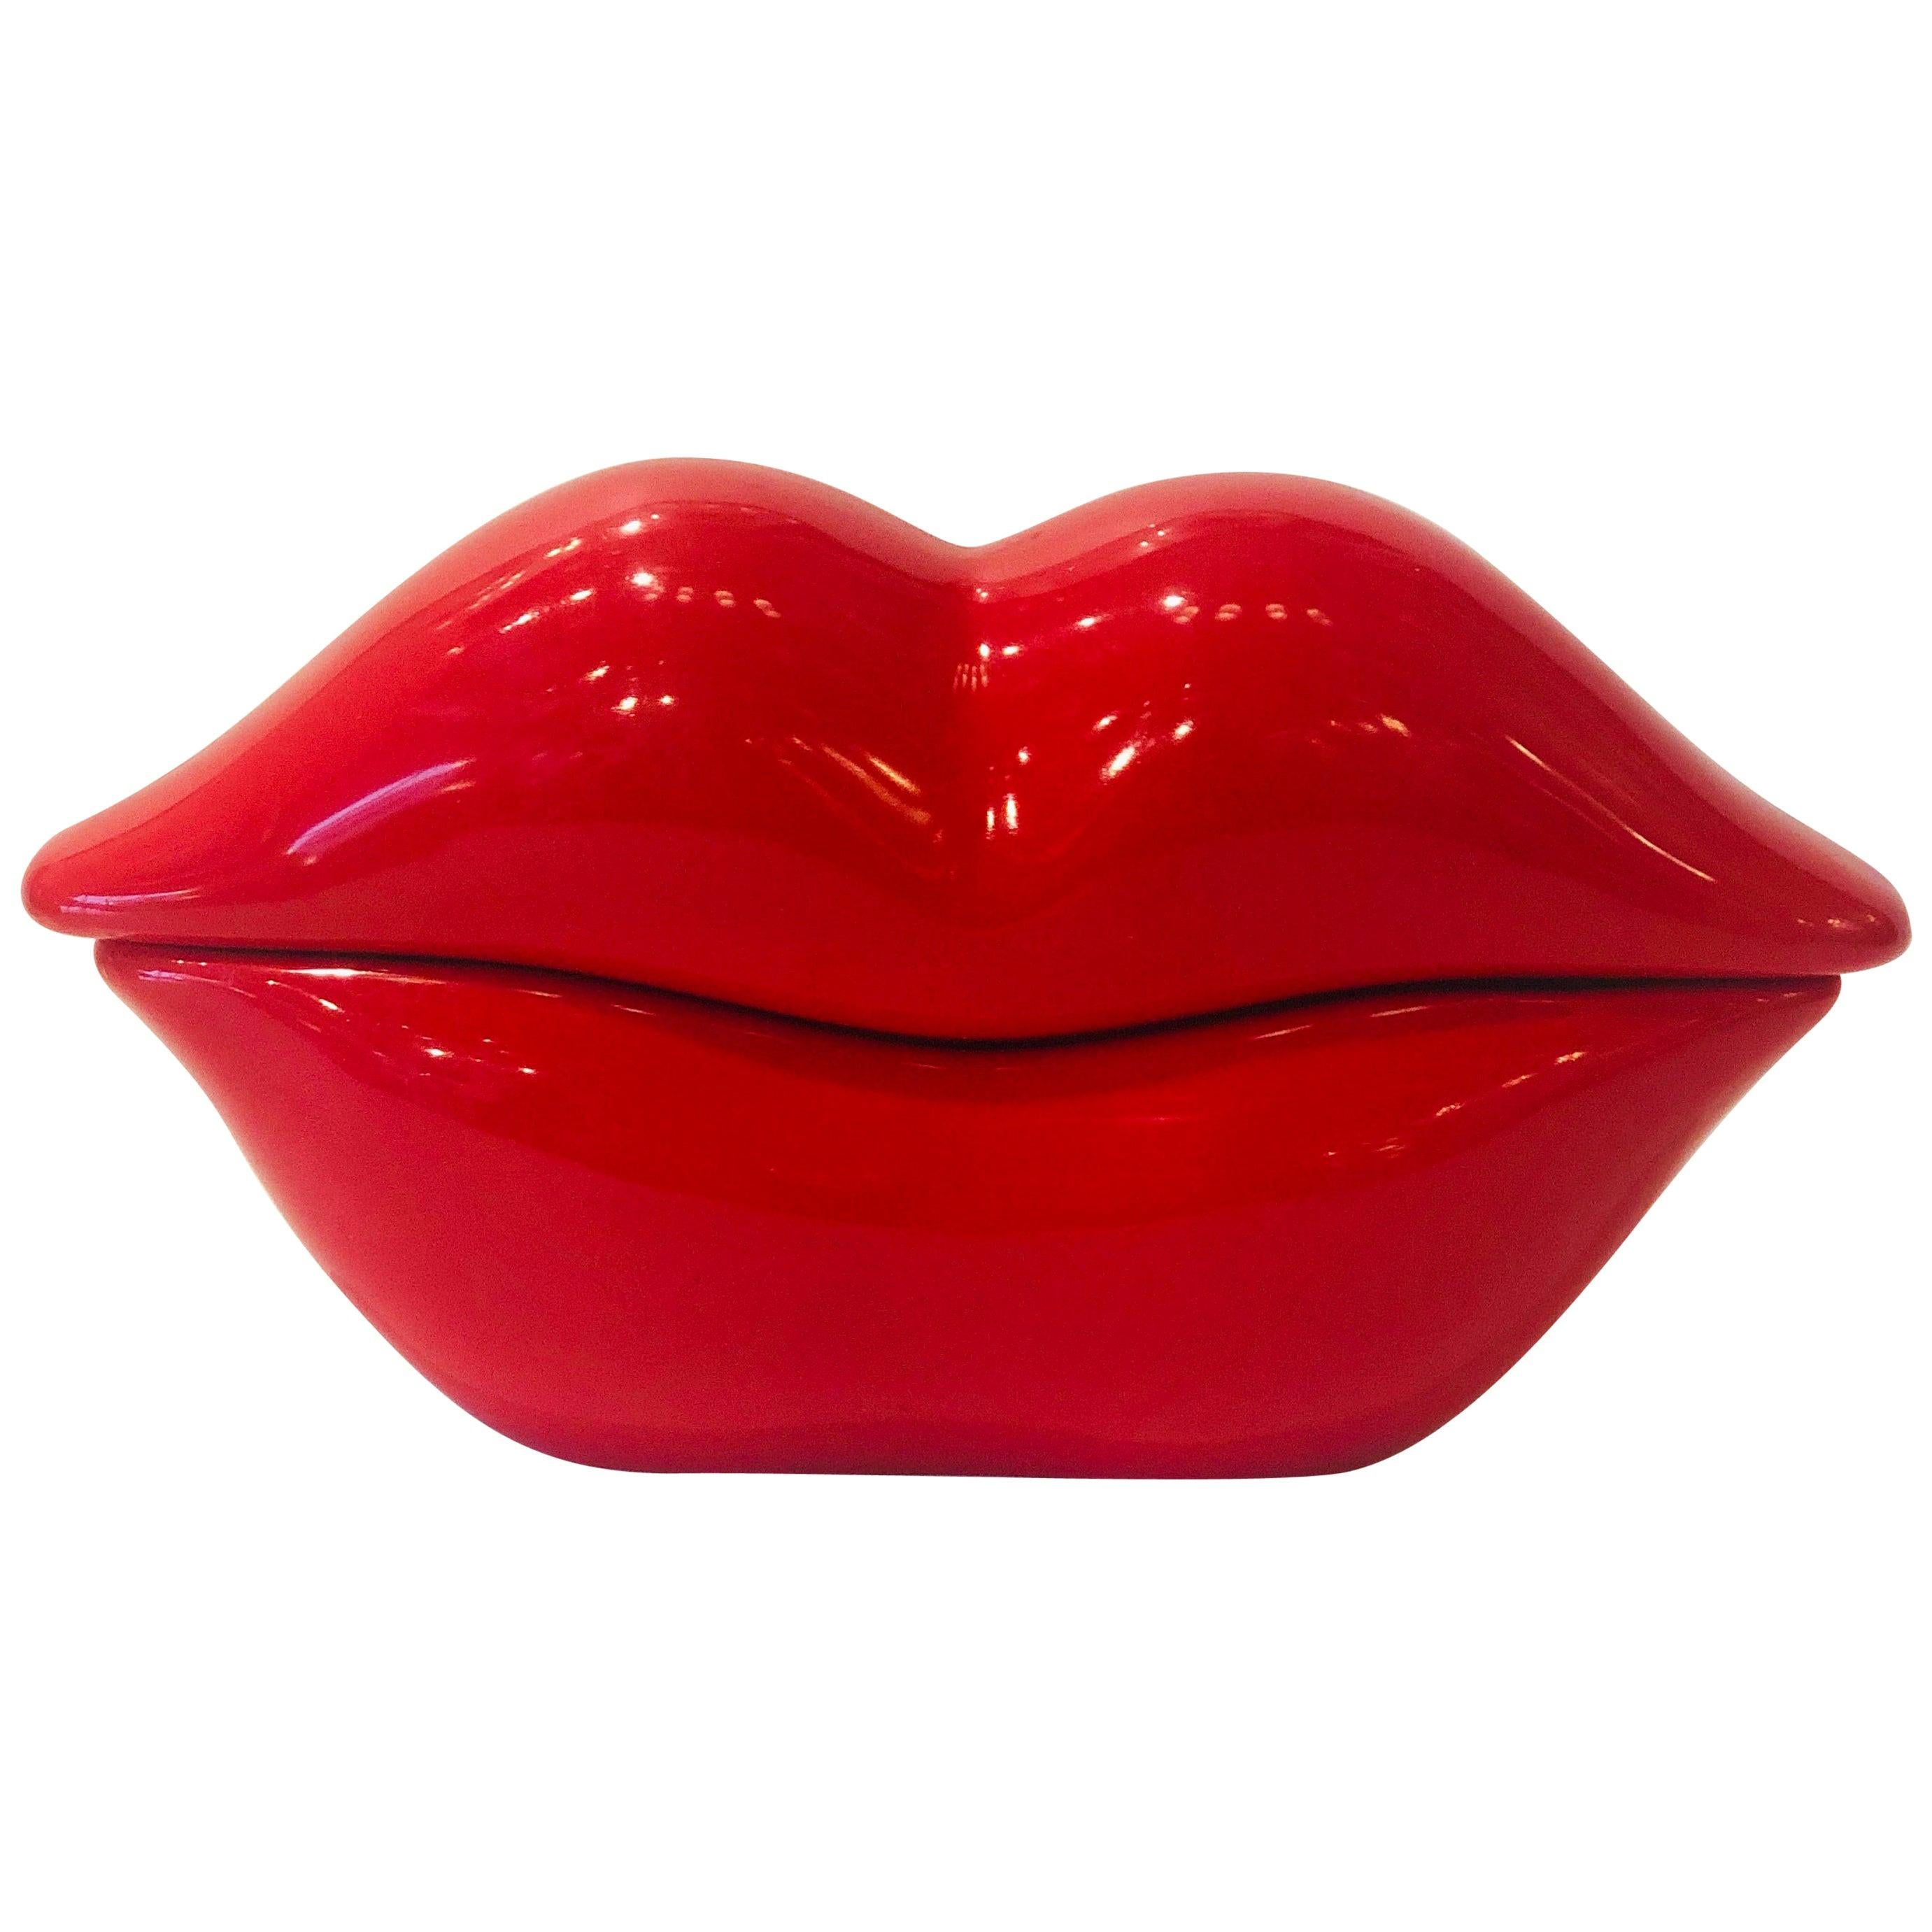 Mod Telemania "Hac Lips" Red Lips Handset Push-Button Telephone For Sale